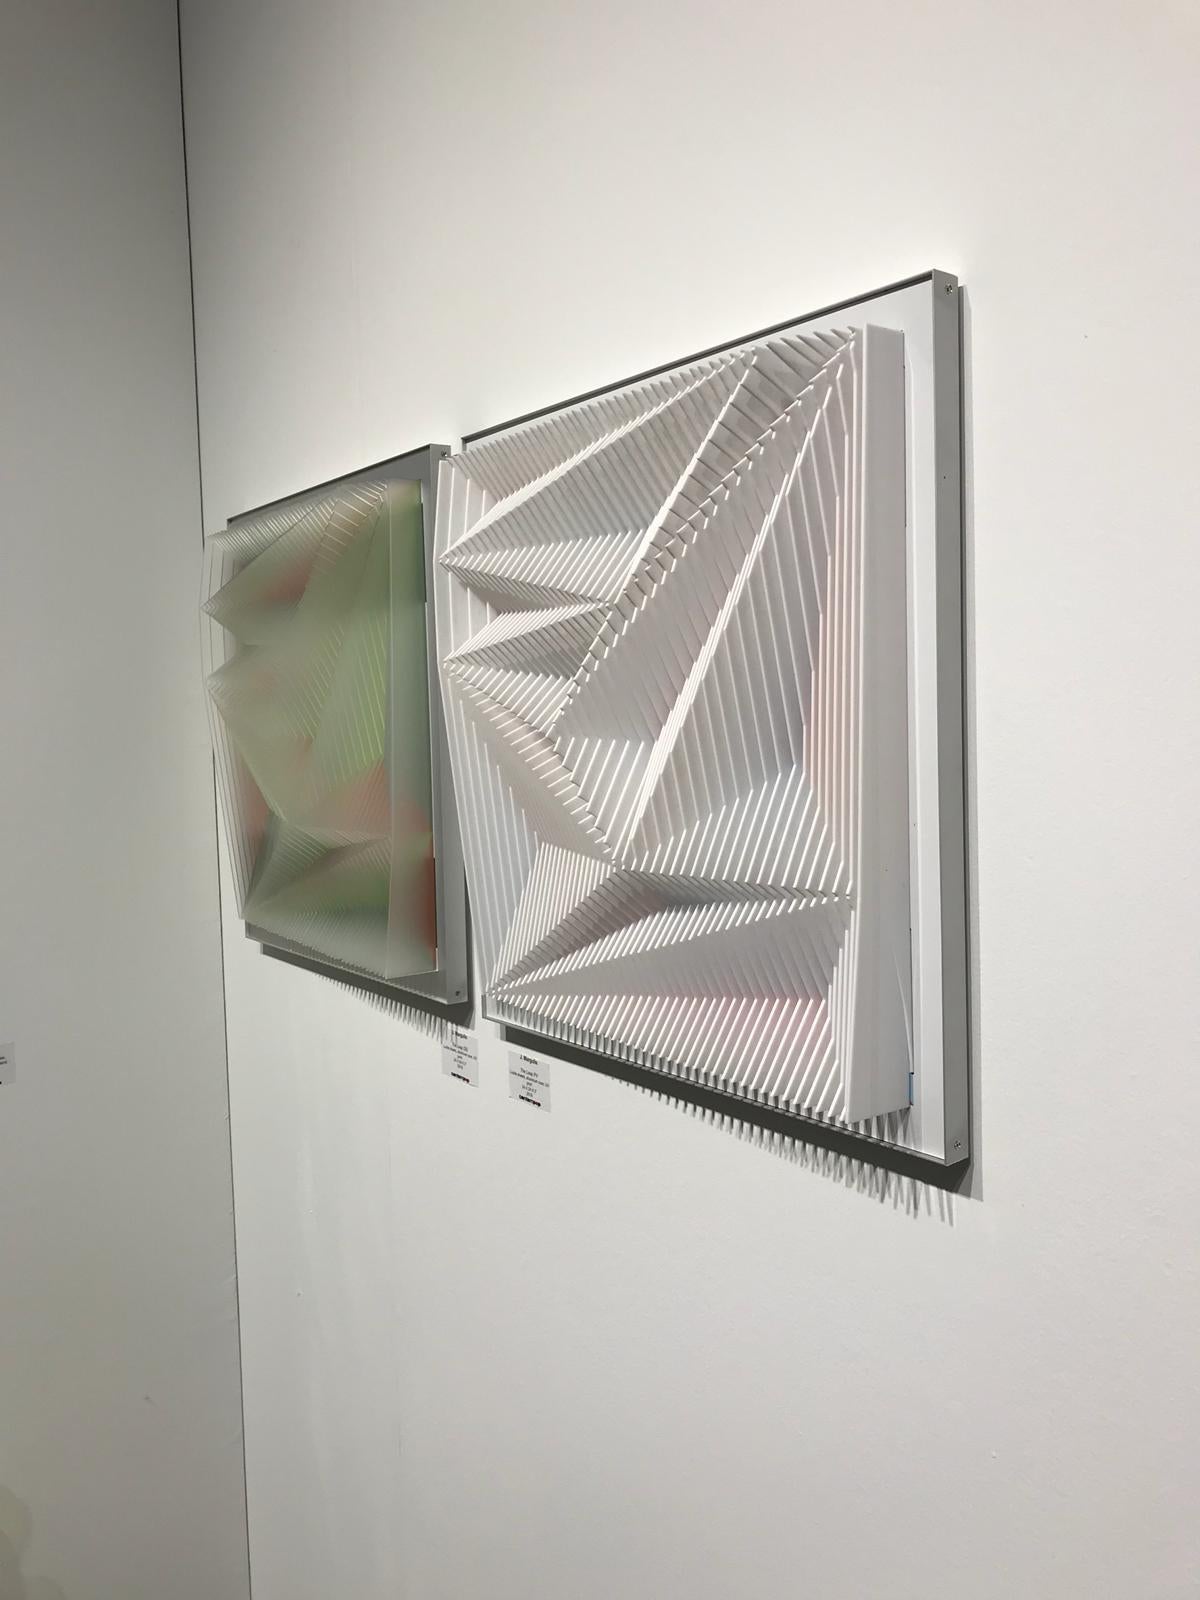 This unique piece by Margulis is from his latest body of works and is part of an edition of 9. After assembling the Plexiglas sheets onto the aluminium core, he uses acrylic paints to cover some the front of the sheets (video is available upon